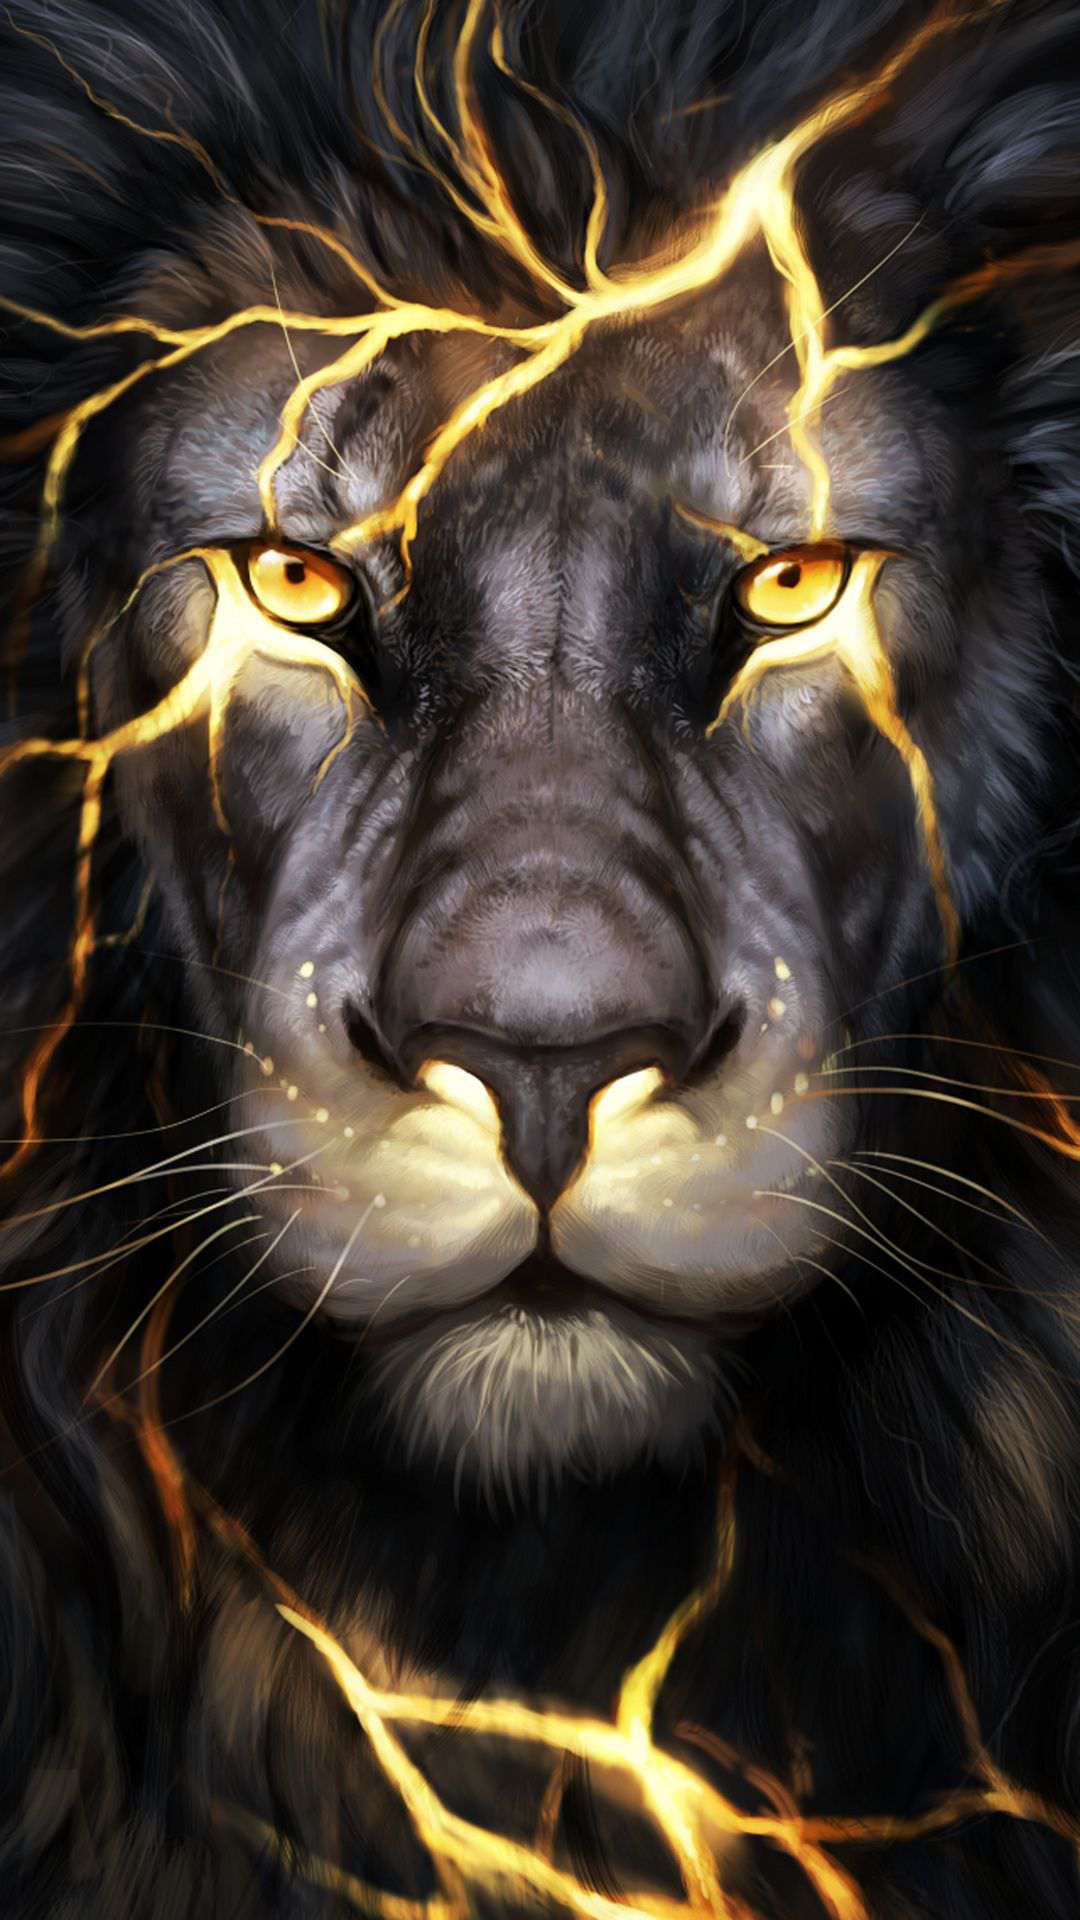 Lion King IPhone Wallpaper - IPhone Wallpapers : iPhone Wallpapers